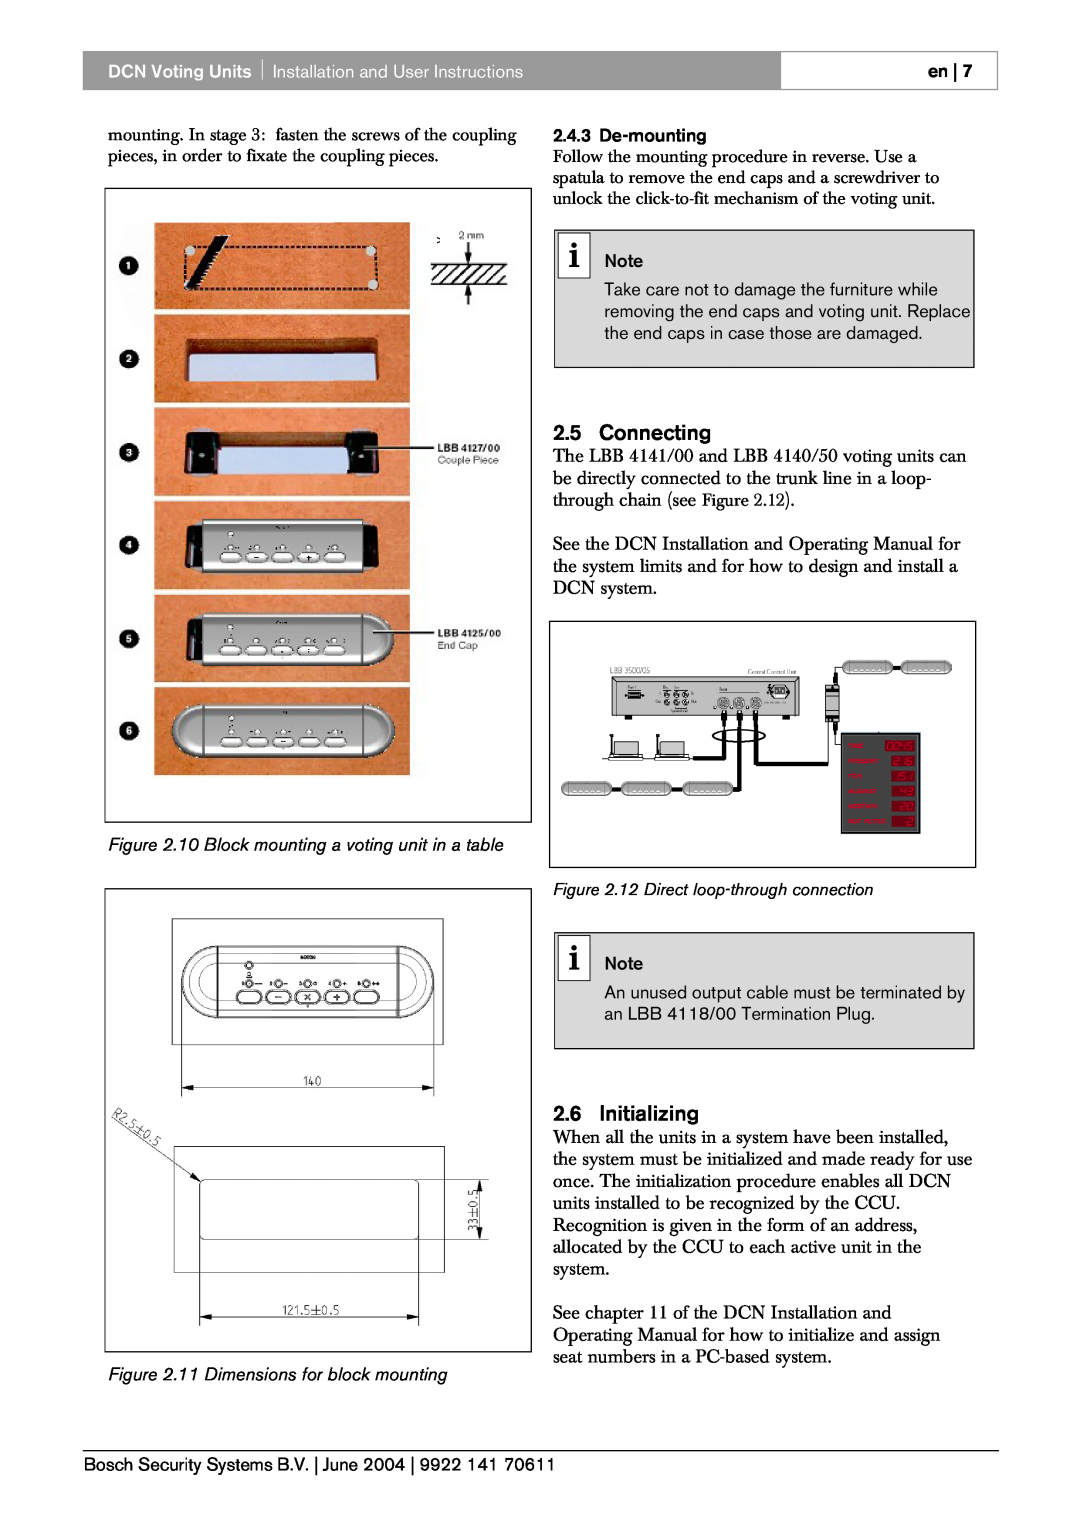 Bosch Appliances 50 Connecting, Initializing, 10 Block mounting a voting unit in a table, 11 Dimensions for block mounting 